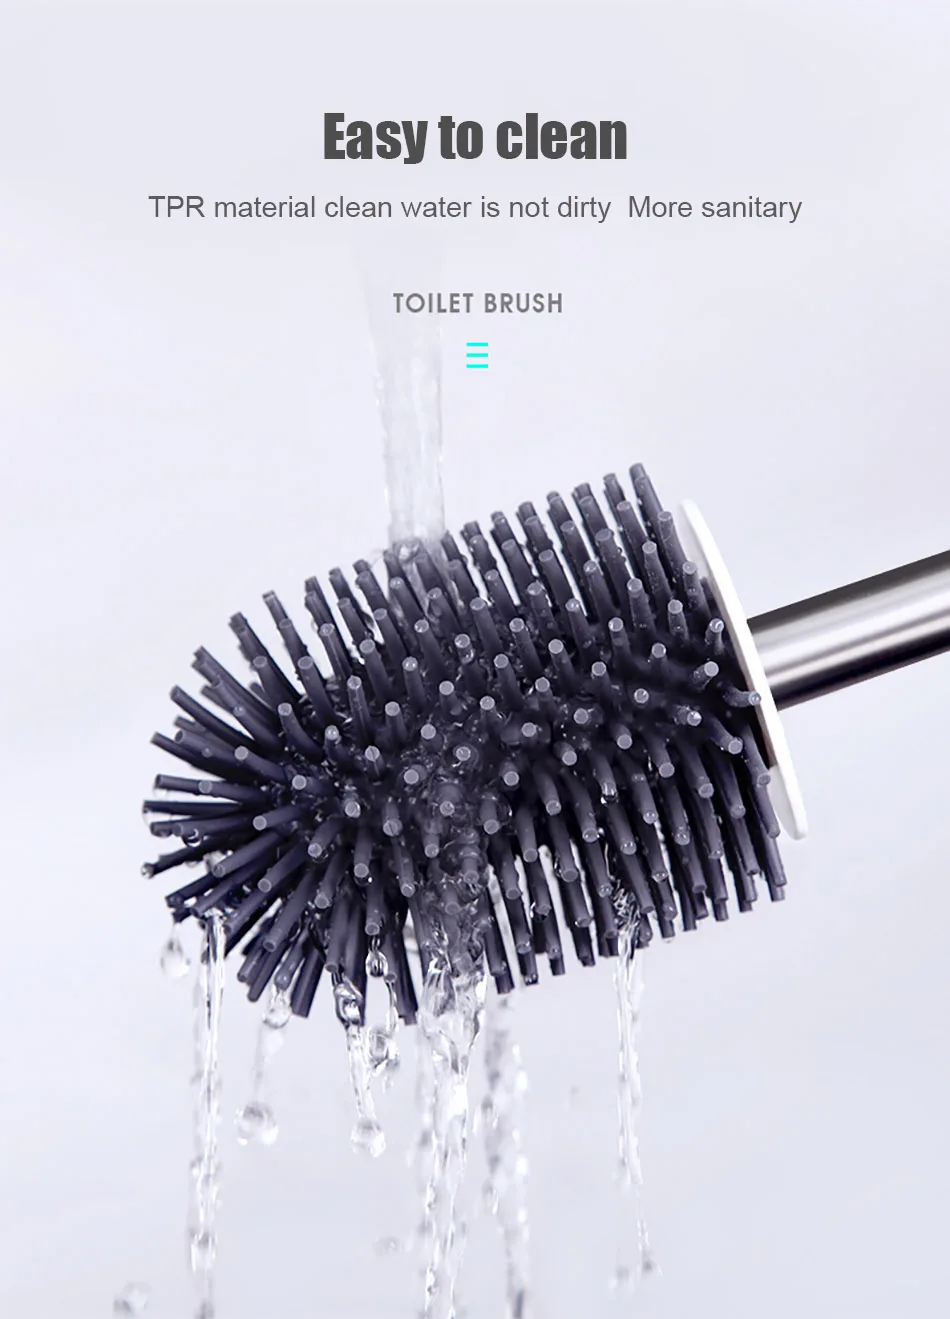 Silicone tpr toilet brush wall-mounted cleaning brush for bathroom household cleaning product bathroom accessories